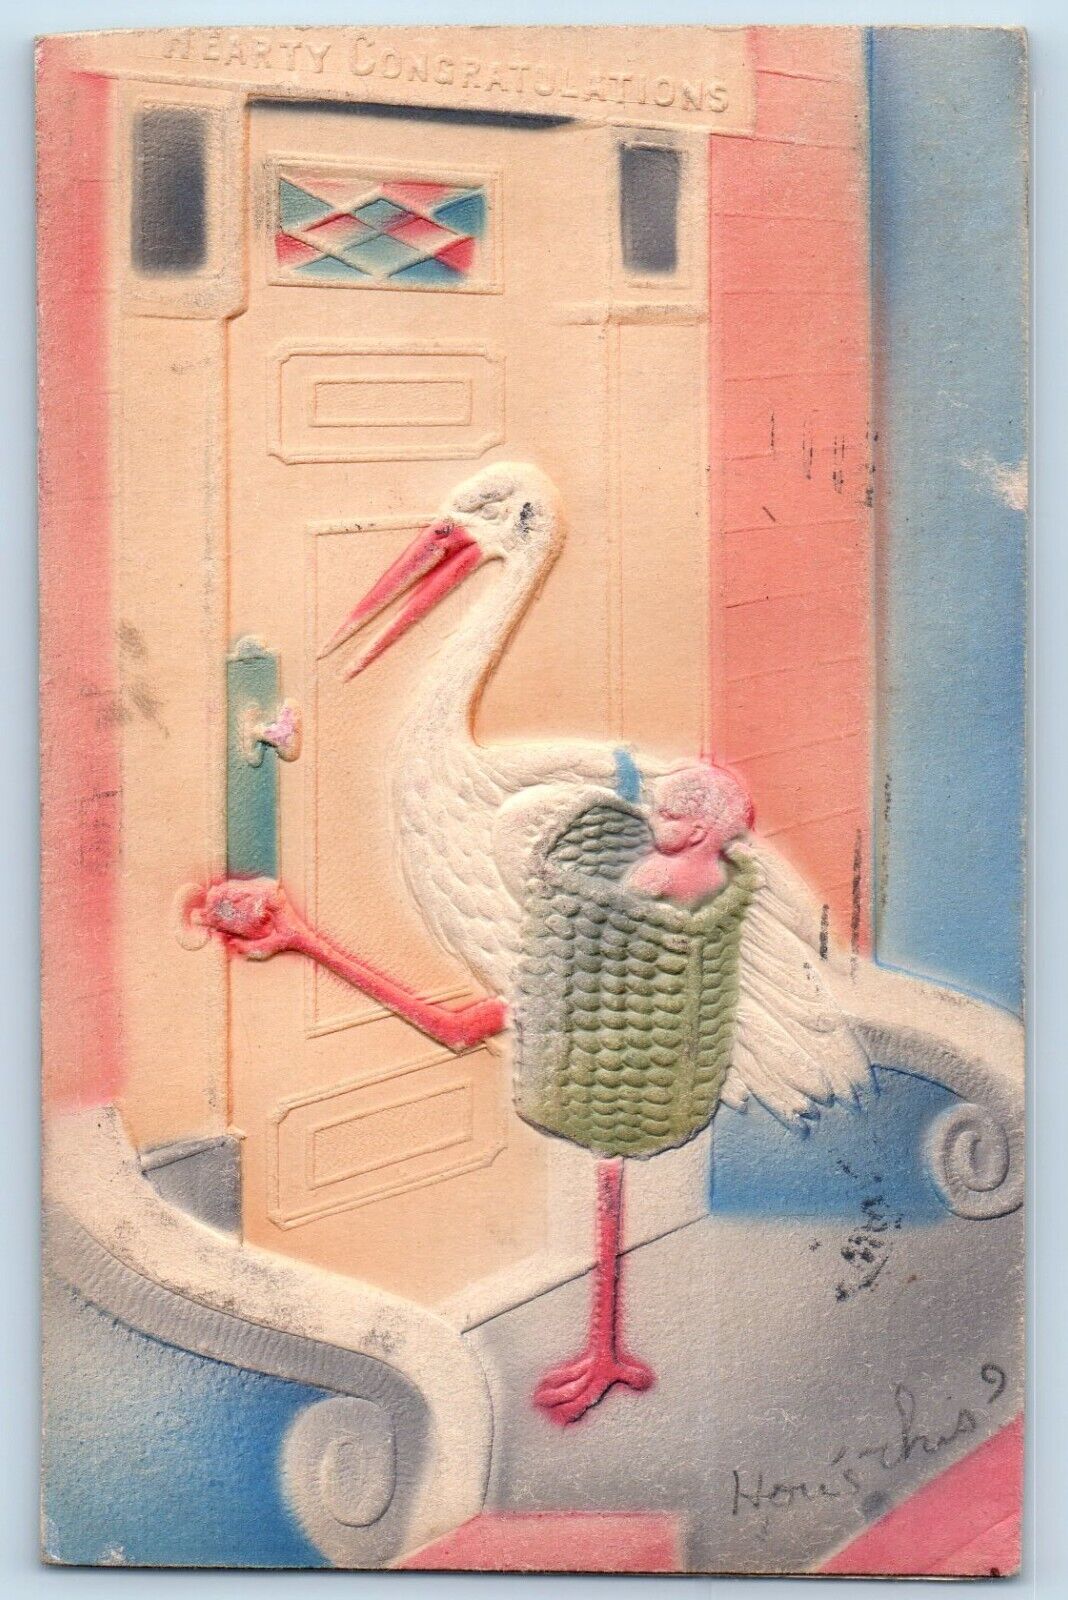 Fort Wayne Indiana IN Postcard Hearty Congratulations Stork Baby On Basket 1907